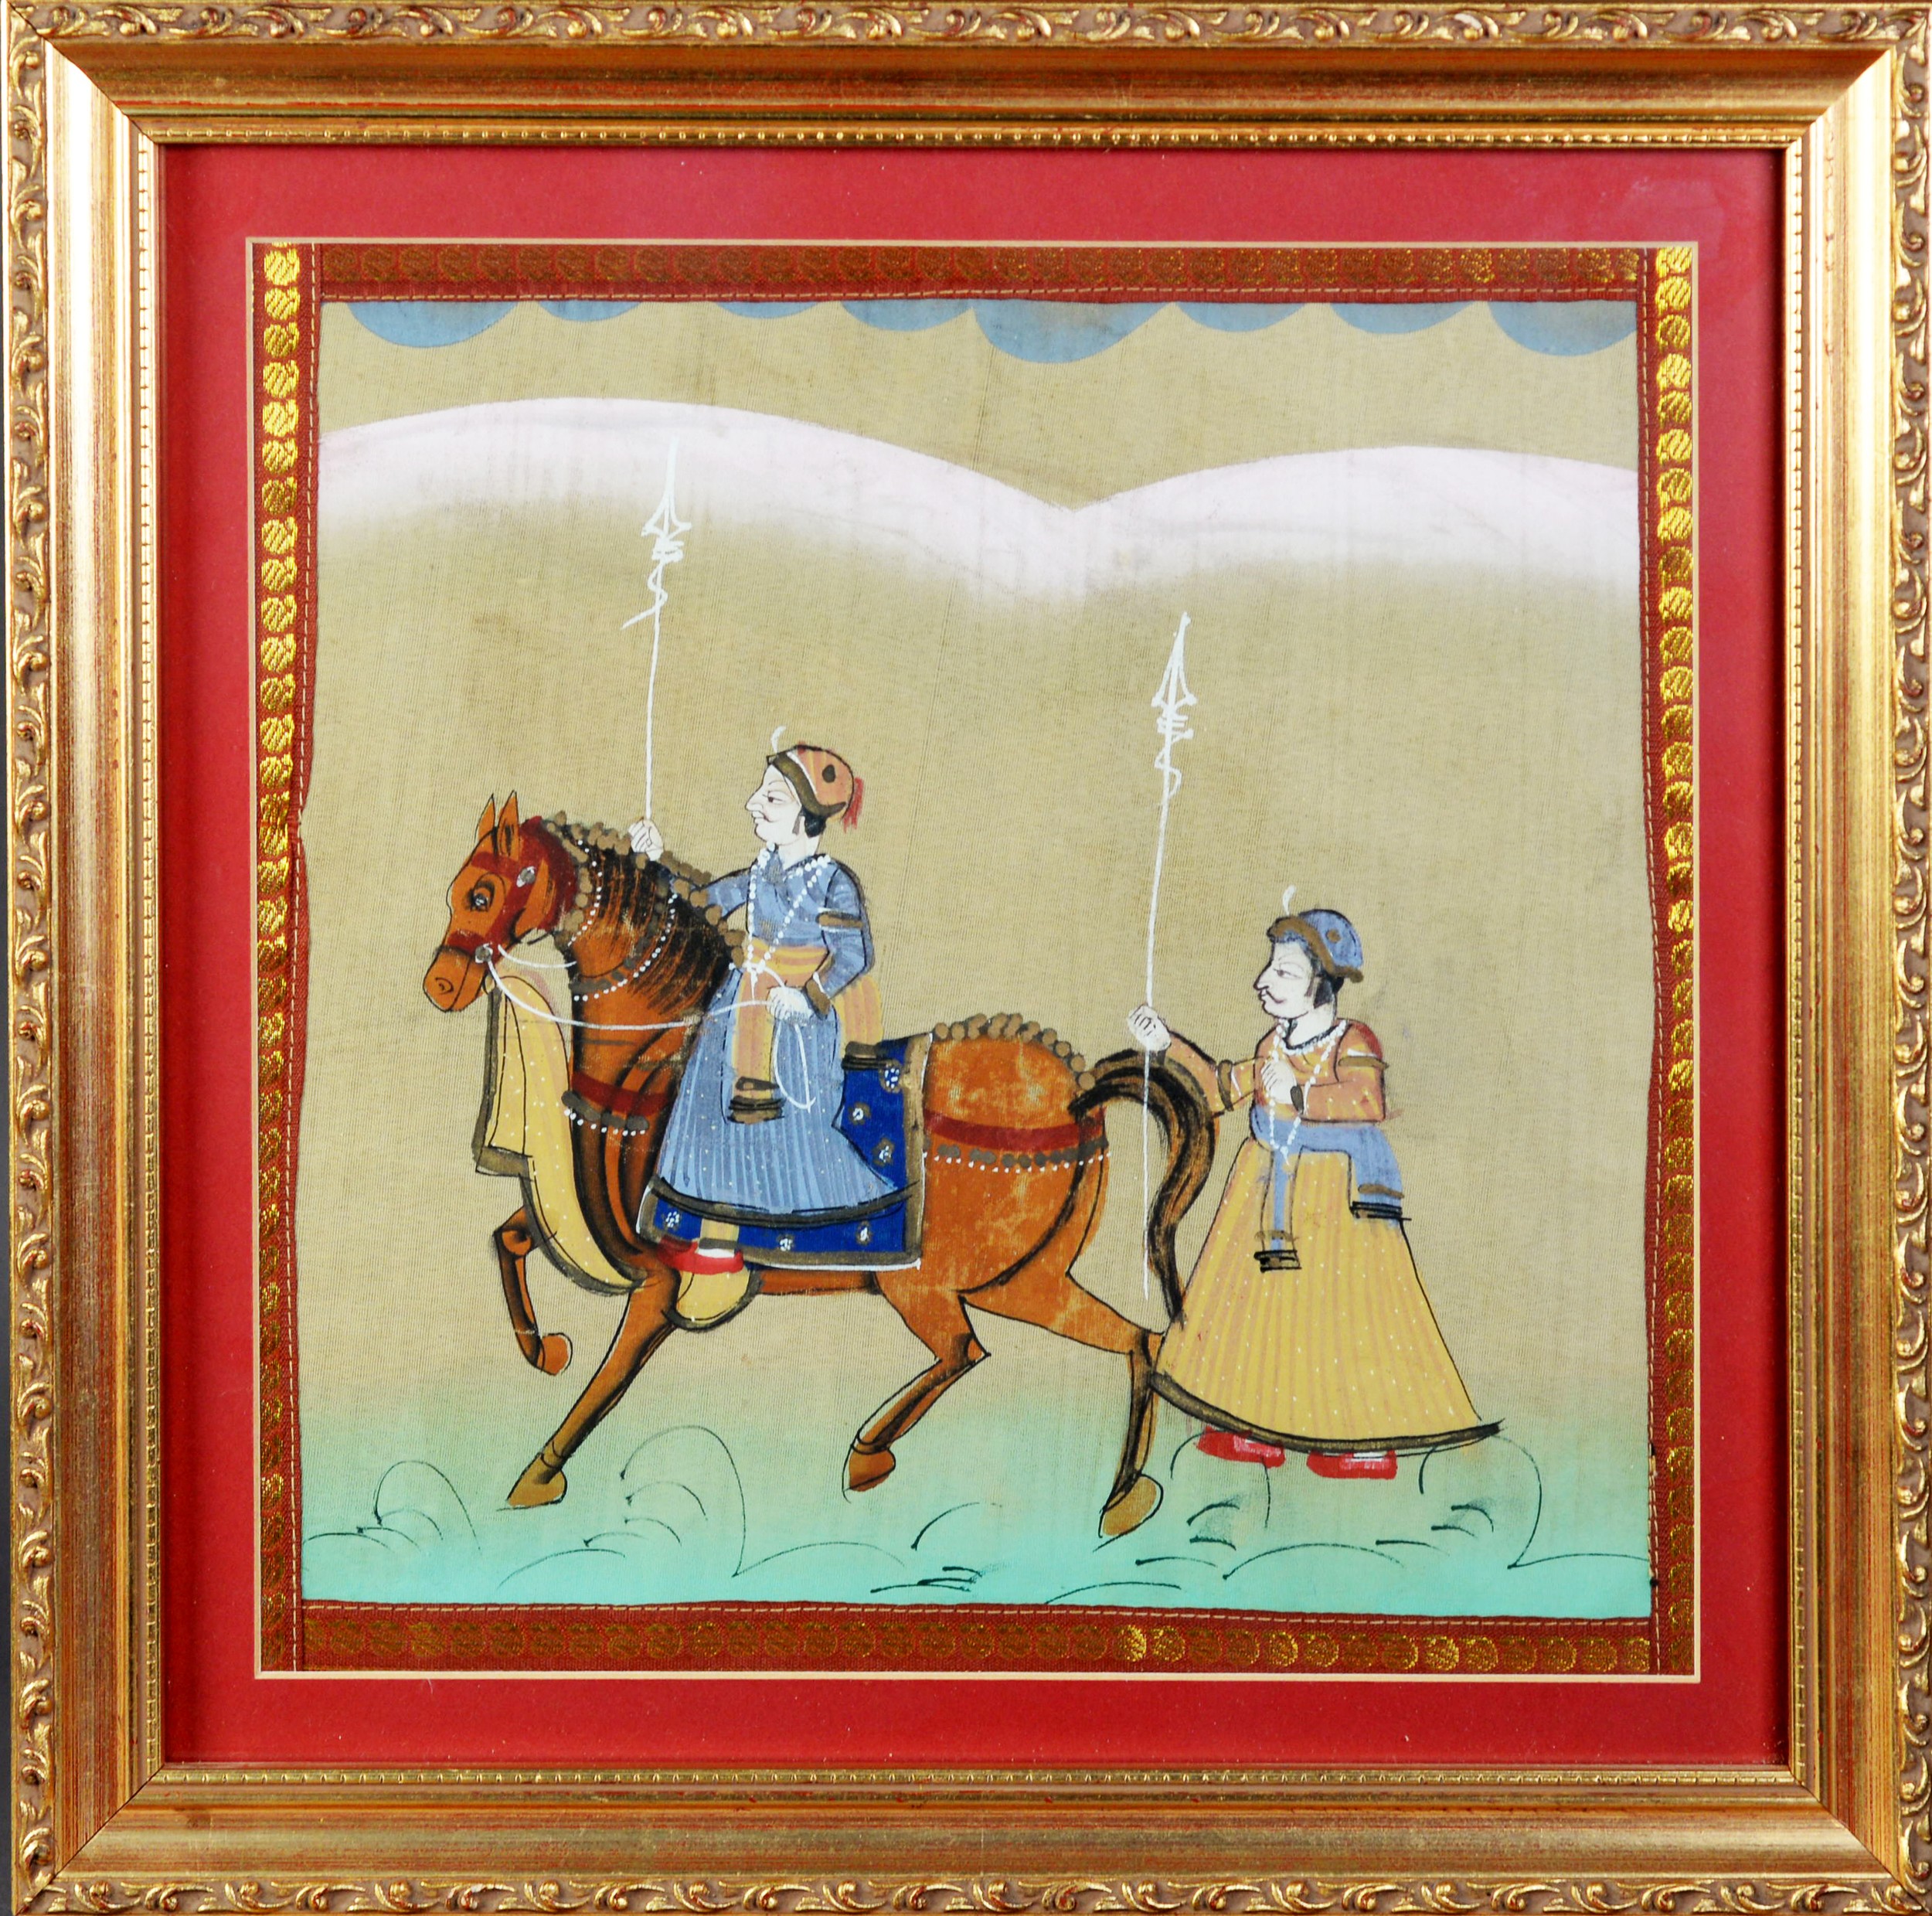 PAIR OF INDIAN GOUACHE DRAWINGS ON PAPER, EACH OF TWO WARRIORS, ONE ON HORSEBACK, within embroidered - Image 4 of 8